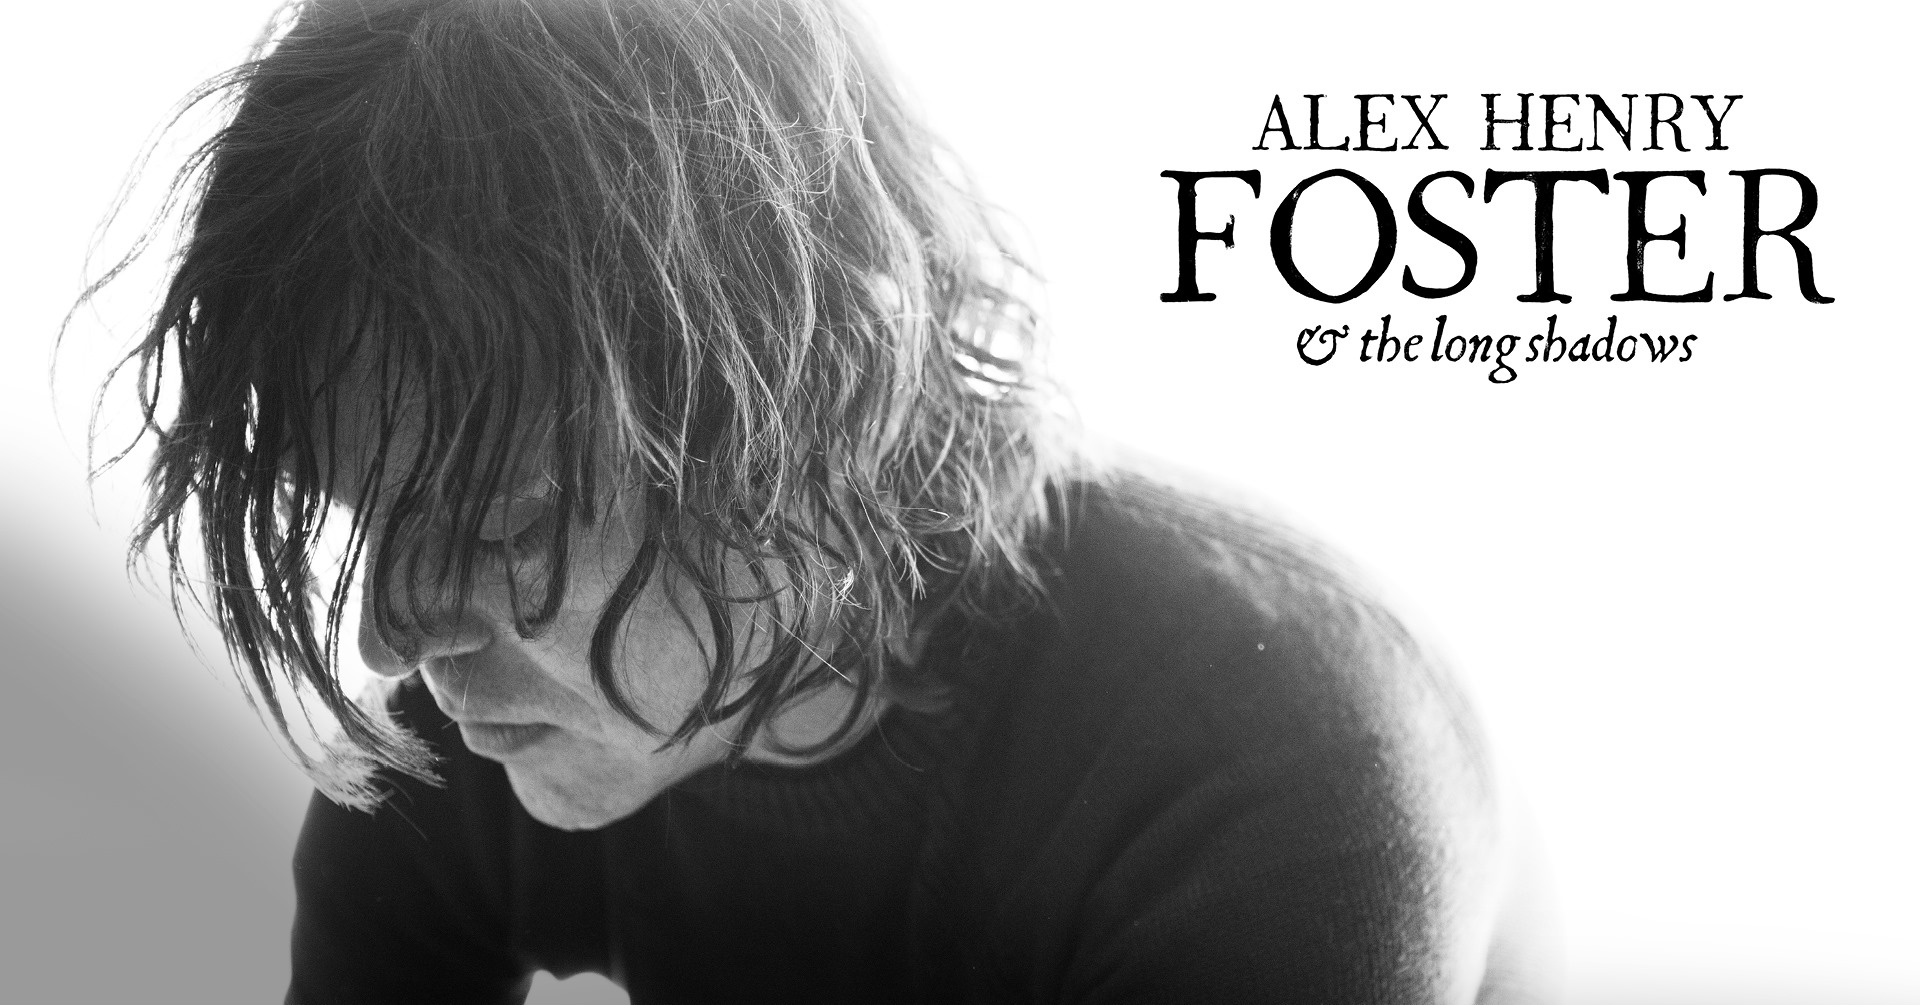 Alex Henry Foster & - Alex Henry Foster & The Long Shadows